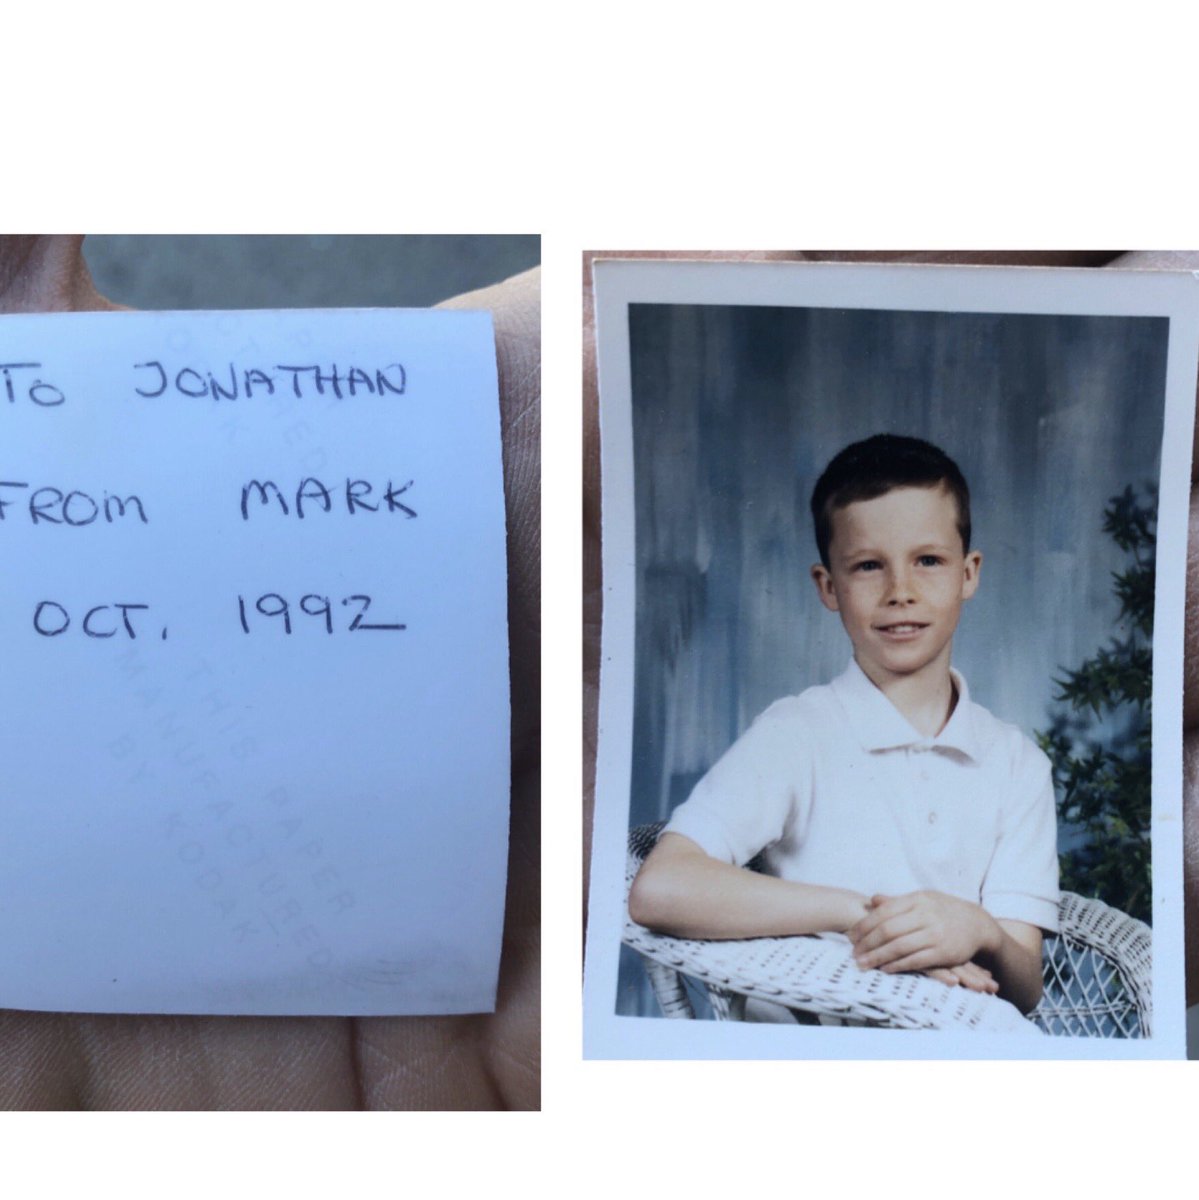 Found this wallet-sized photo on the ground in #forestlawn It’s 28 years old and it looks well kept so I imagine it’s important to whoever lost it. Anyone recognize it? #yyc